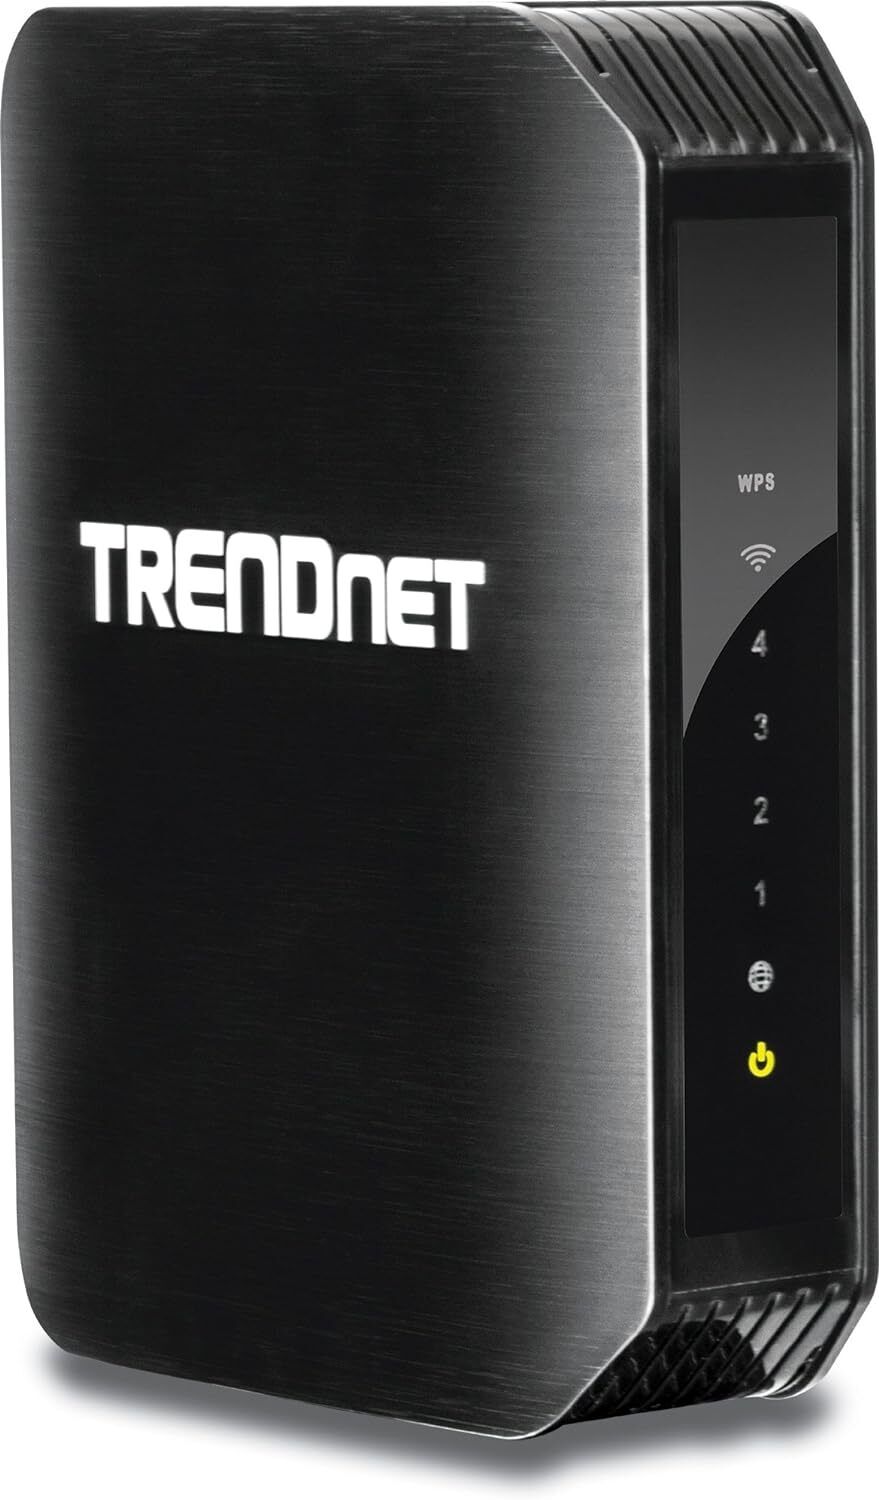 TRENDnet Wireless N600 Concurrent Dual Band Router, TEW-751DR